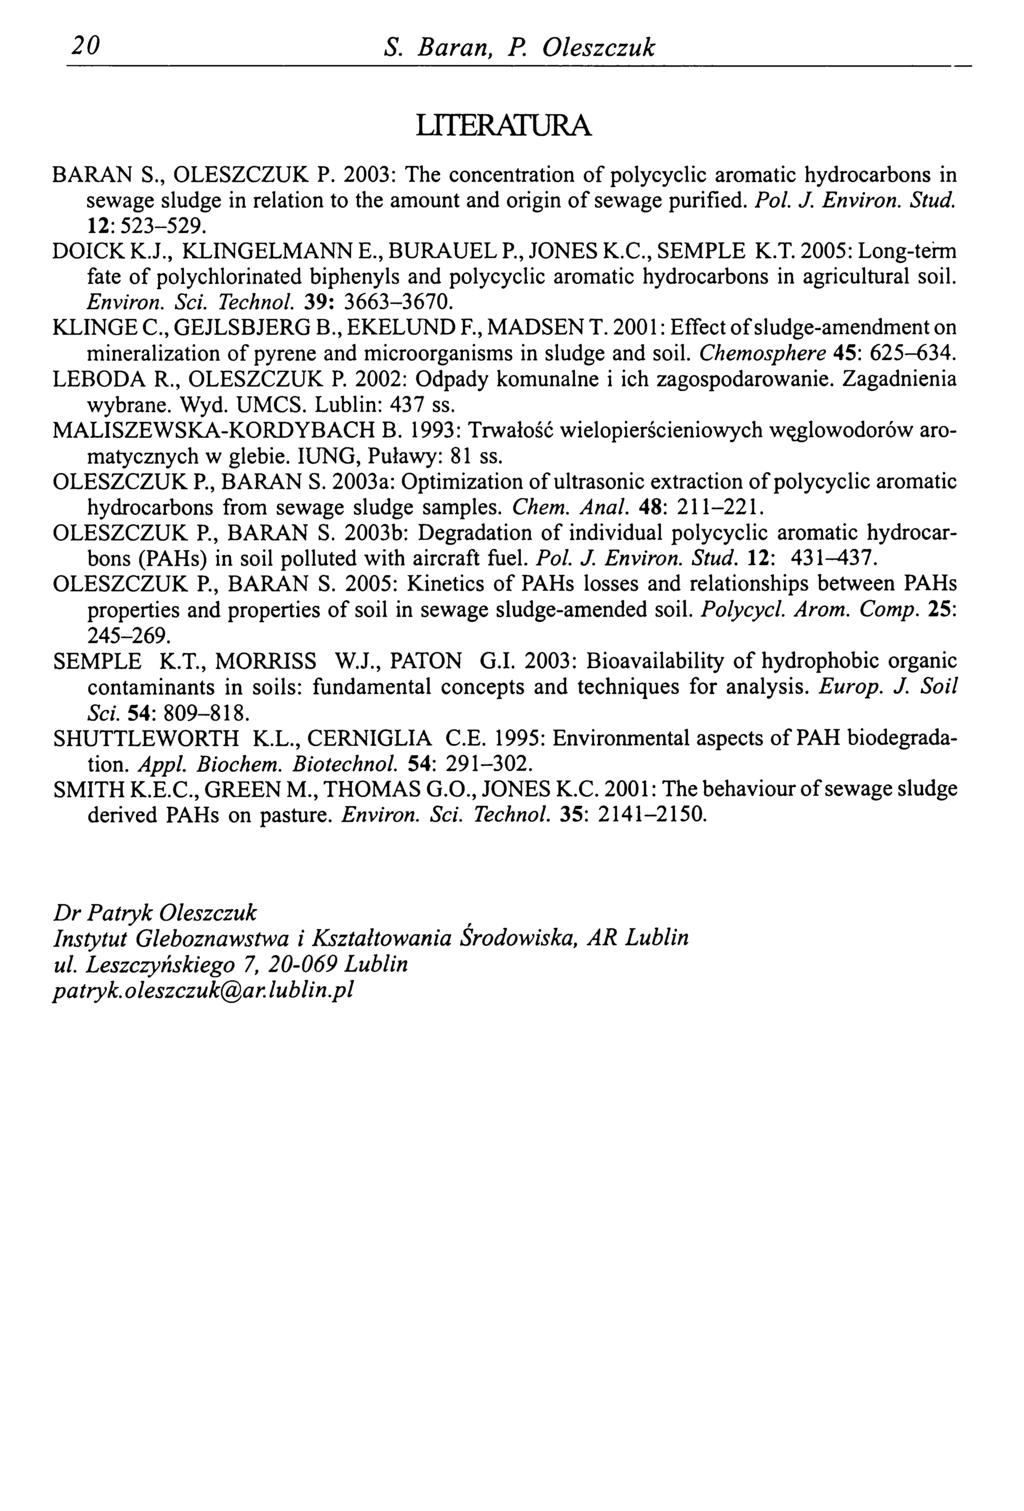 20 S. Baran, P. Oleszczuk LITERATURA BARAN S., OLESZCZUK P. 2003: The concentration of polycyclic aromatic hydrocarbons in sewage sludge in relation to the amount and origin of sewage purified. Pol.